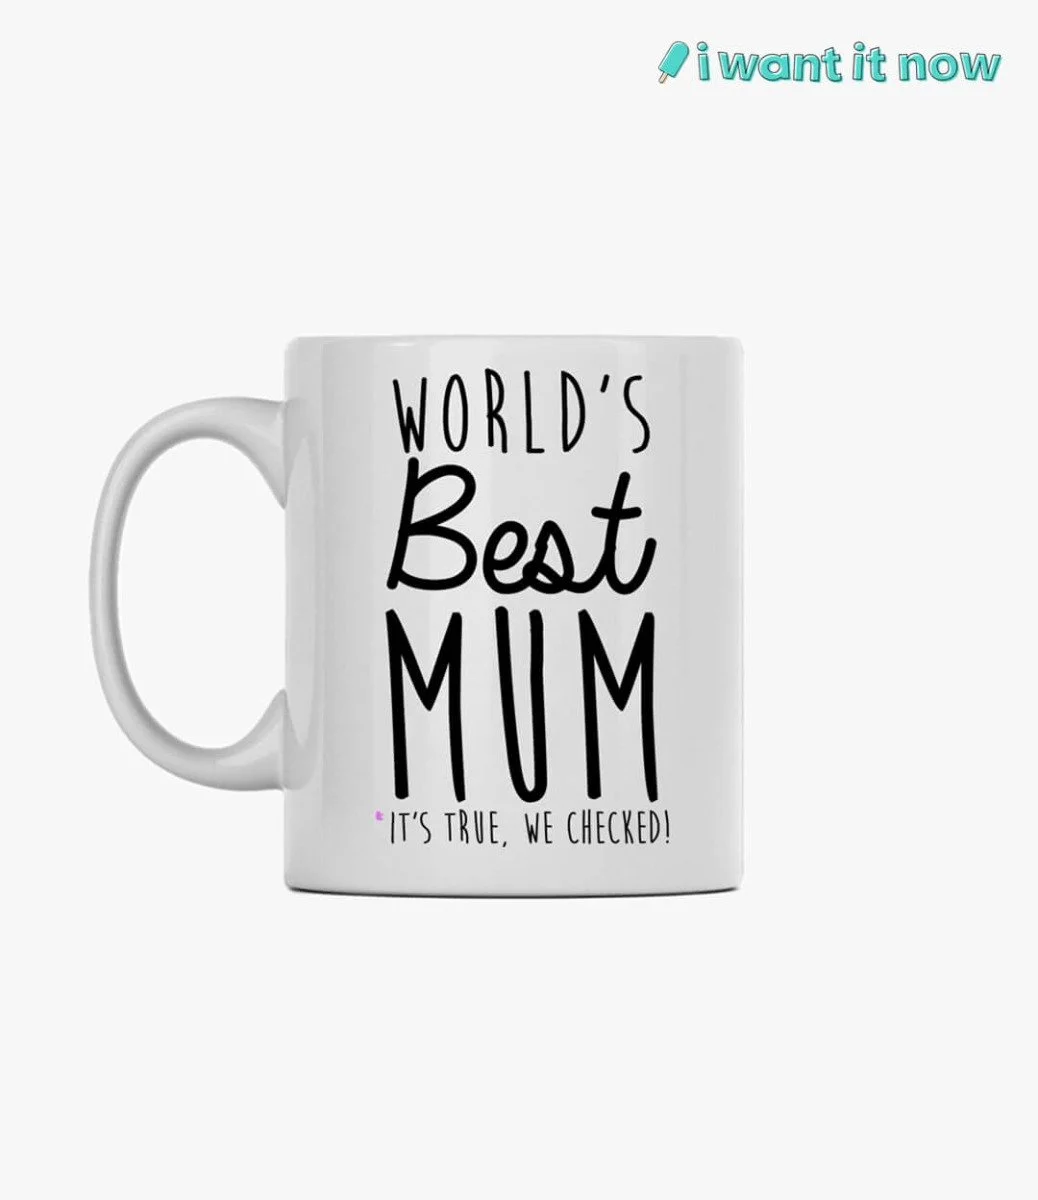 World's Best Mum. It's true, we checked! Mug By I Want It Now